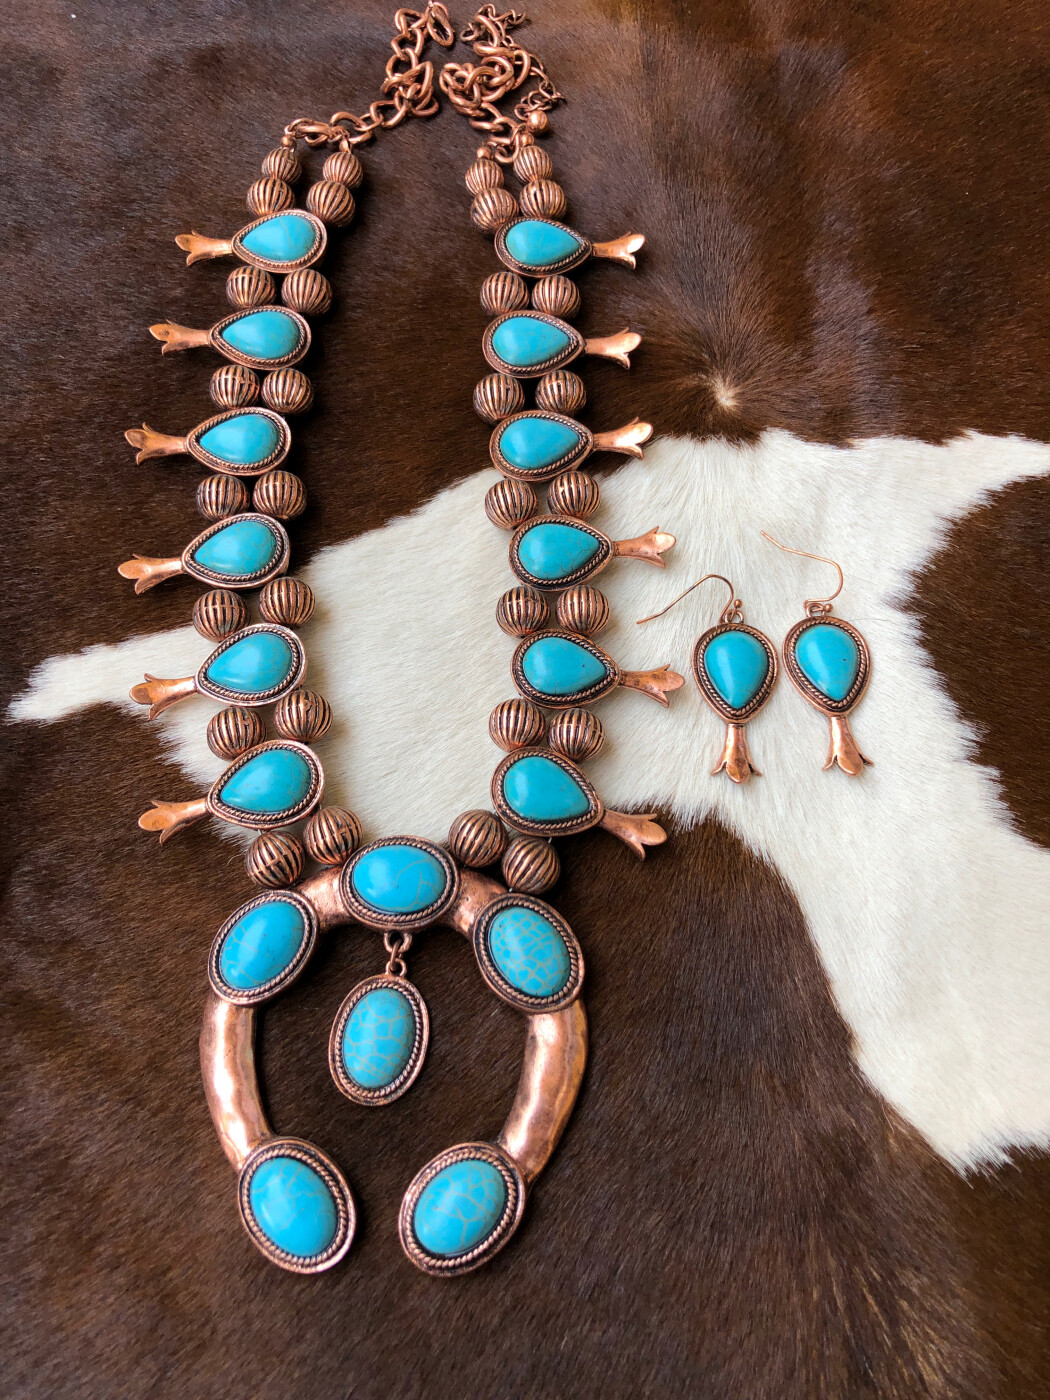 Rare Old Vintage Arvid Anderson RIP FAUX Bear Claw & Exquisite Kingman Turquoise  Squash Blossom Necklace 277 Grams - Etsy | Squash blossom necklace,  Beautiful necklaces, Turquoise squash blossom